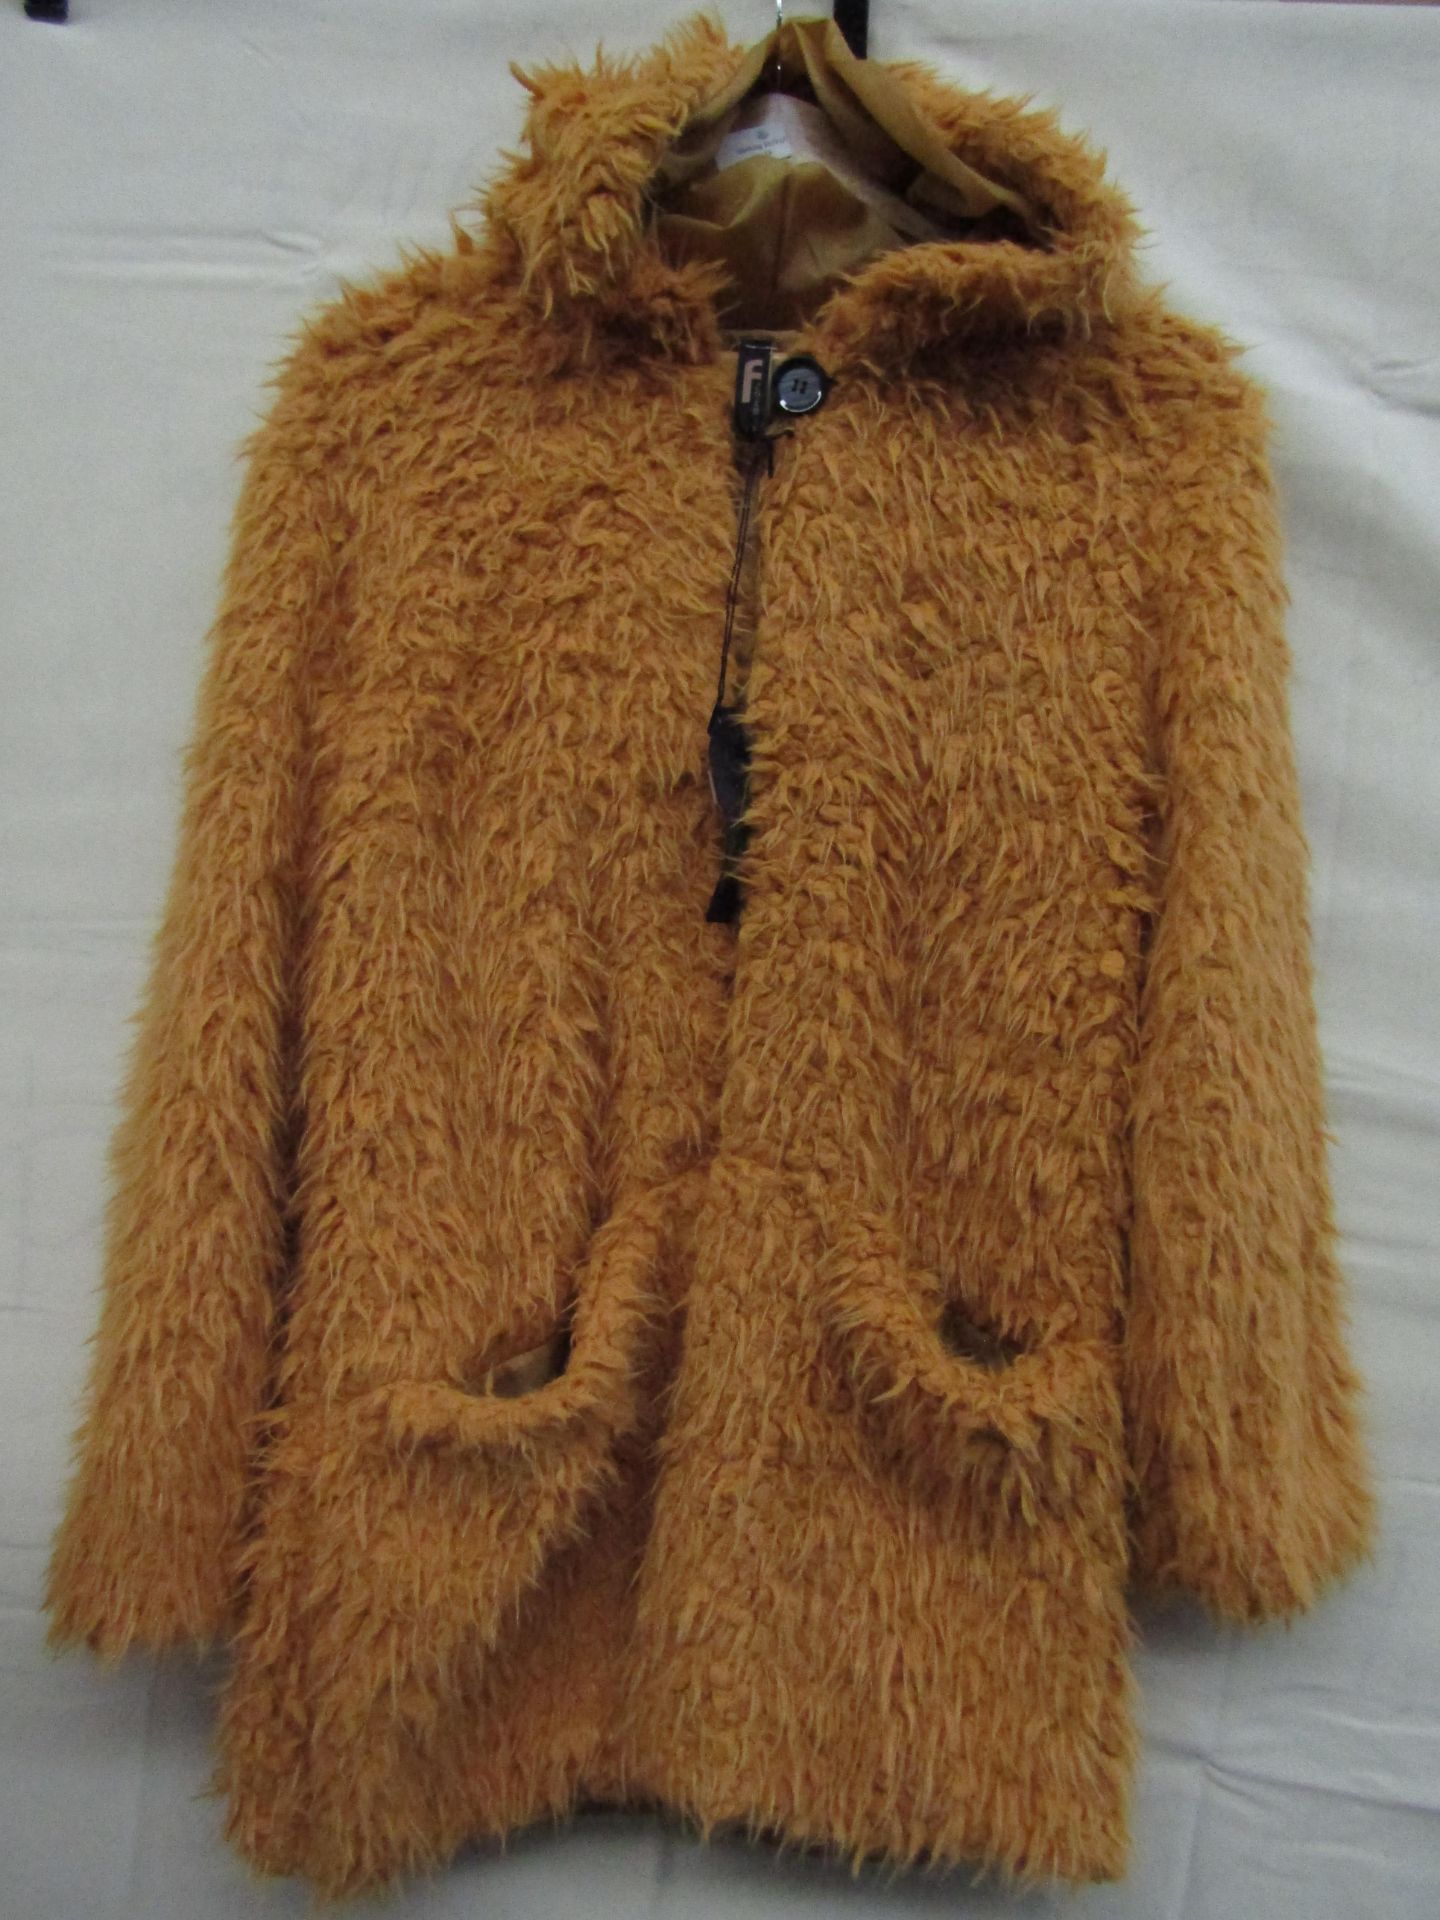 Teddy Bear Jacket Lined Mustard Colour Approx Size 12-14 New With Tags